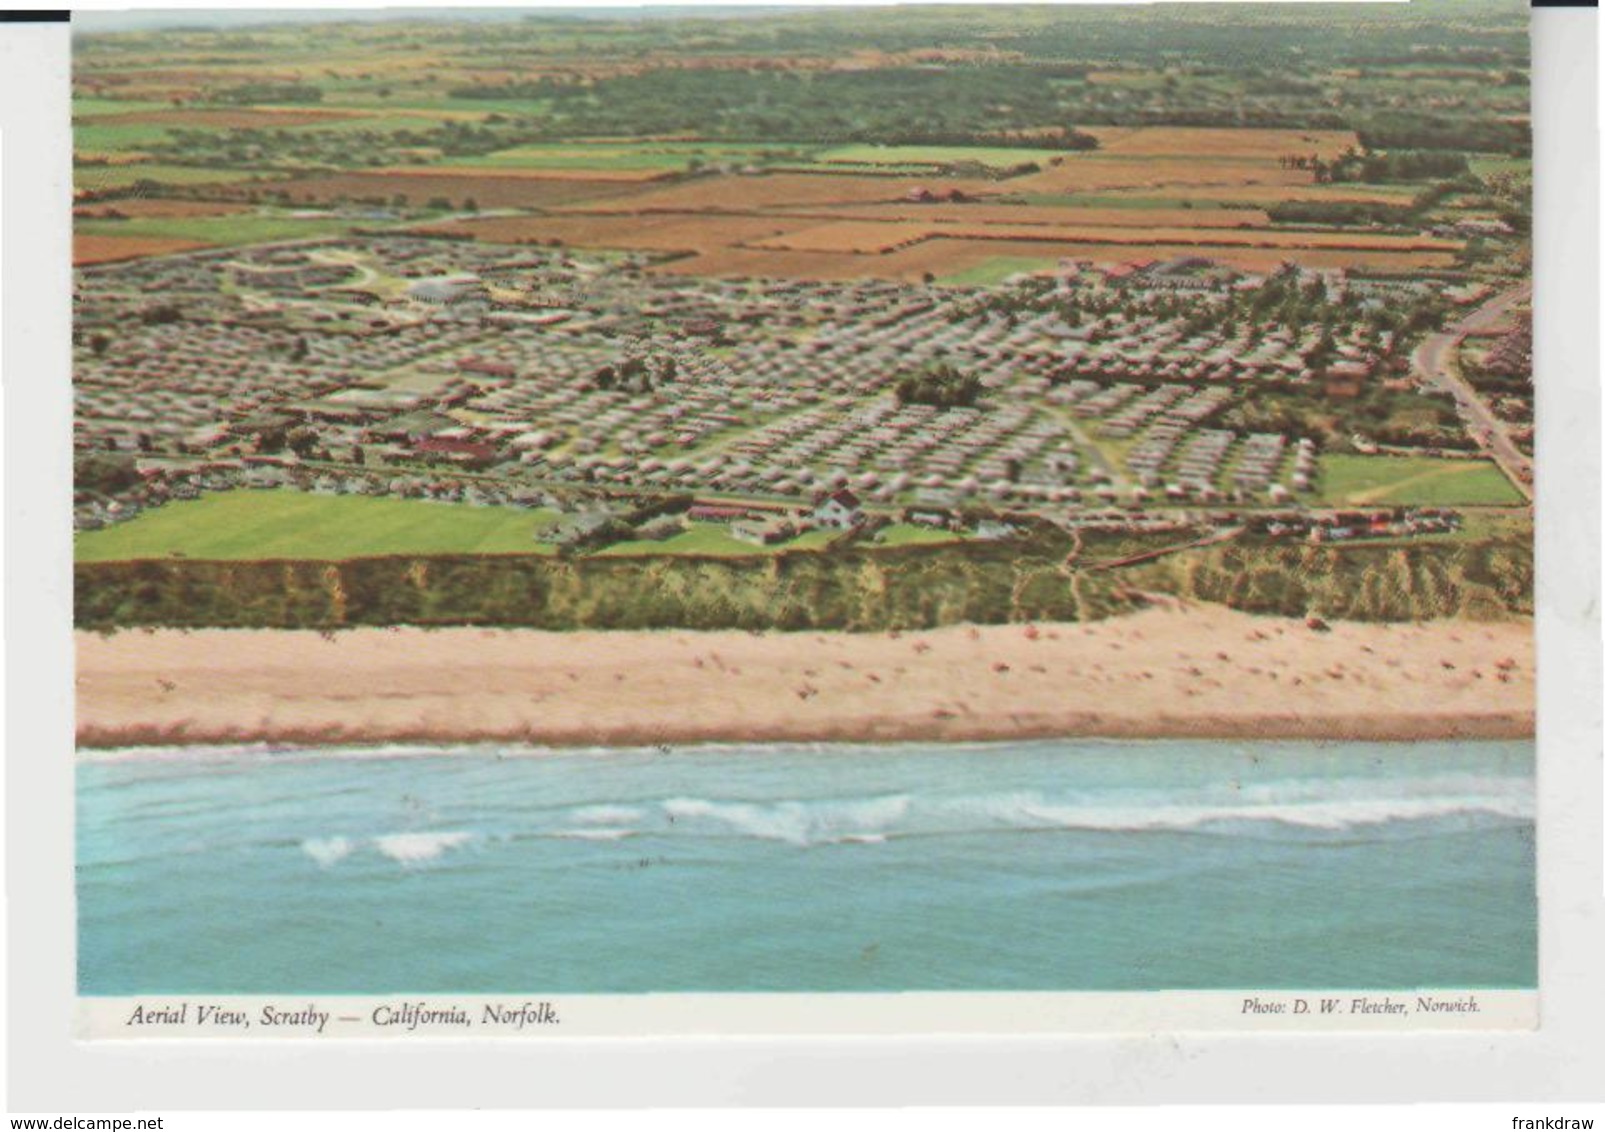 Postcard - Aerial View - Scratby-California Norfolk, Card No..2ds50 - Unused Very Good - Unclassified